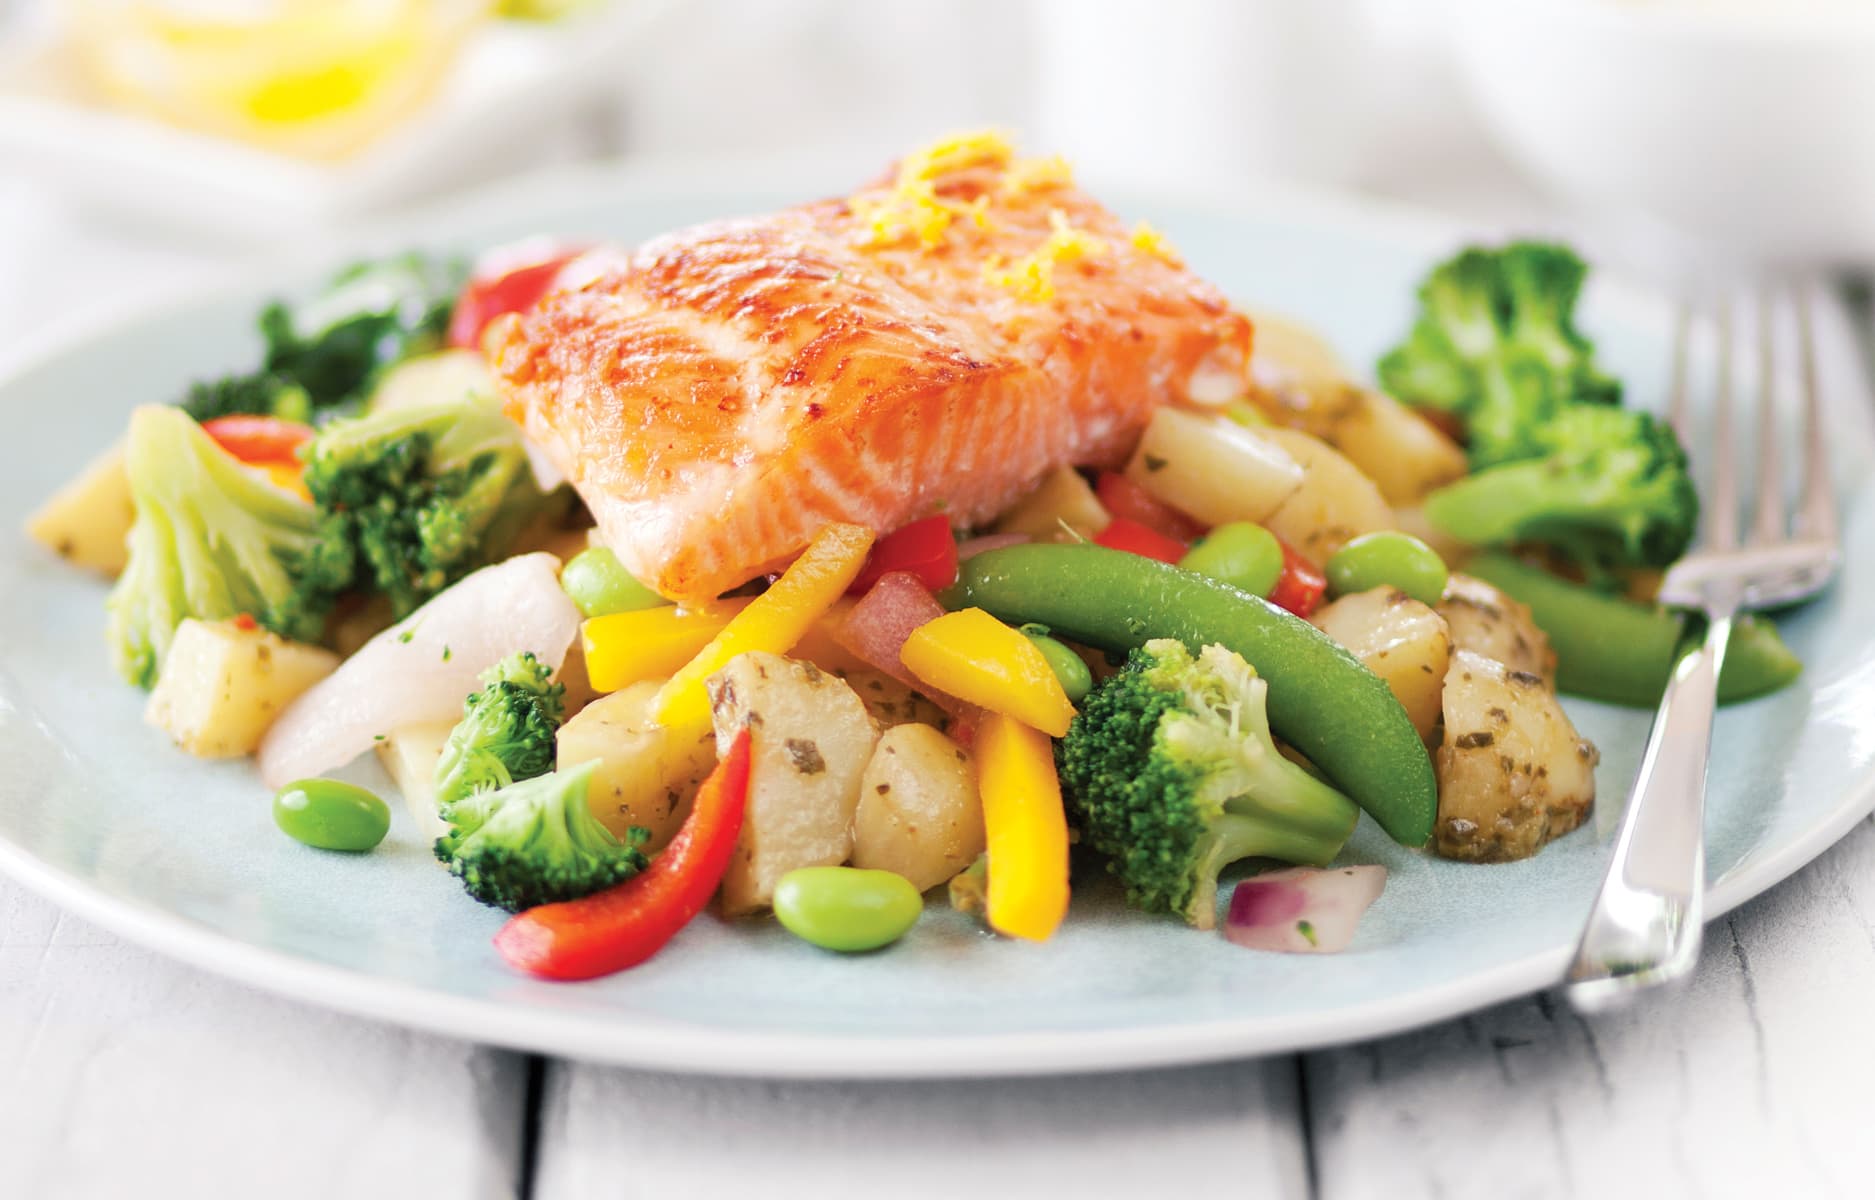 Baked salmon with roasted veges - Healthy Food Guide